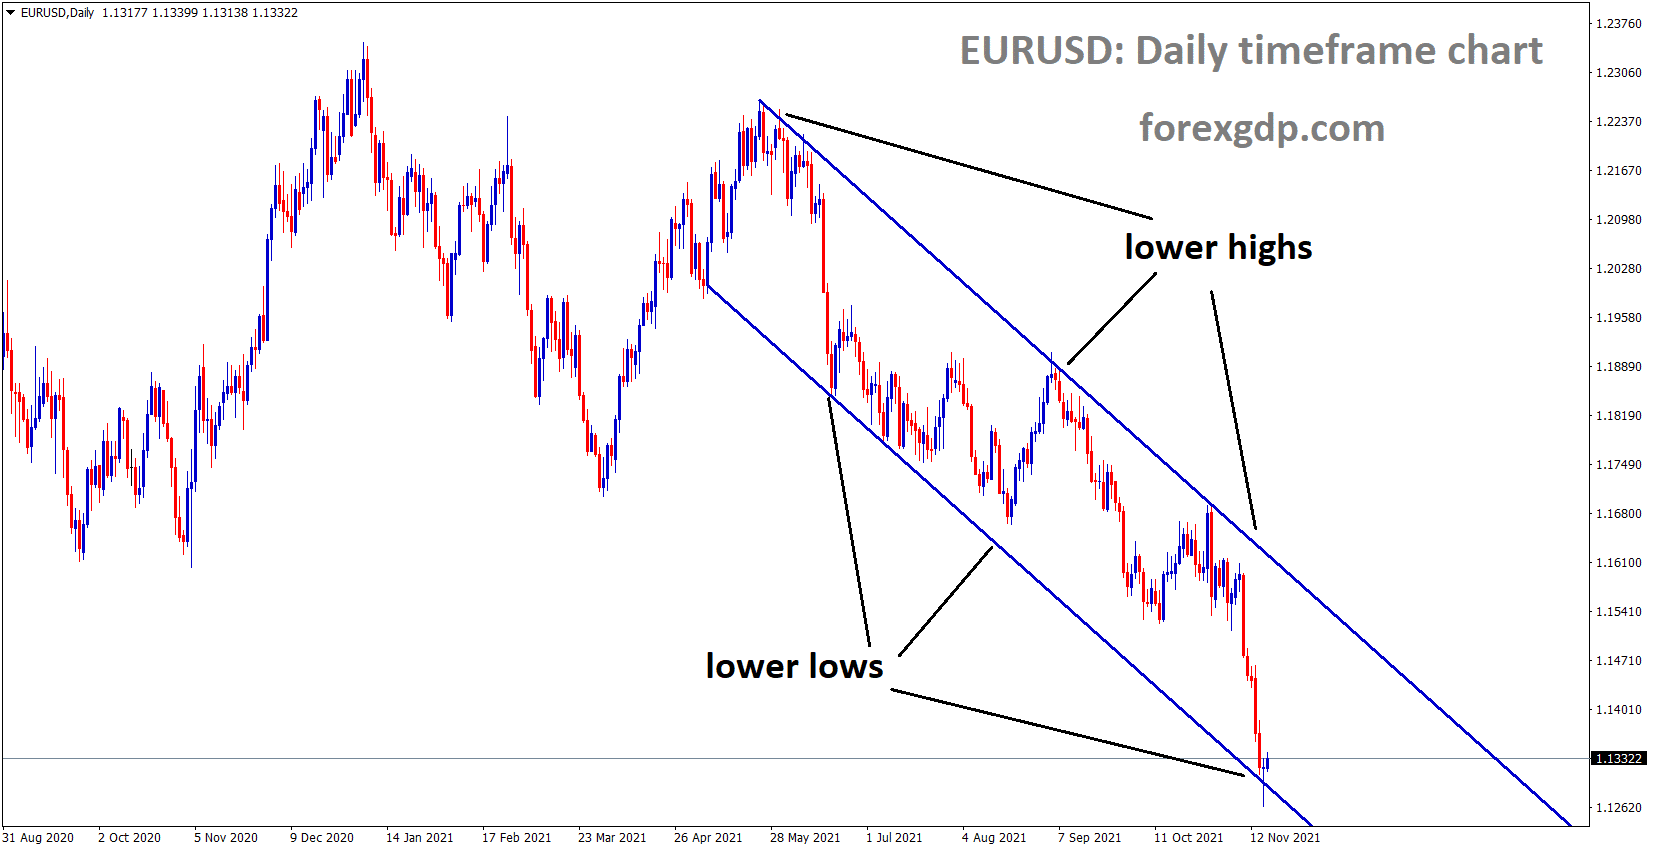 EURUSD is moving in the Descending channel and the market now rebounding from the lower low area of the channel